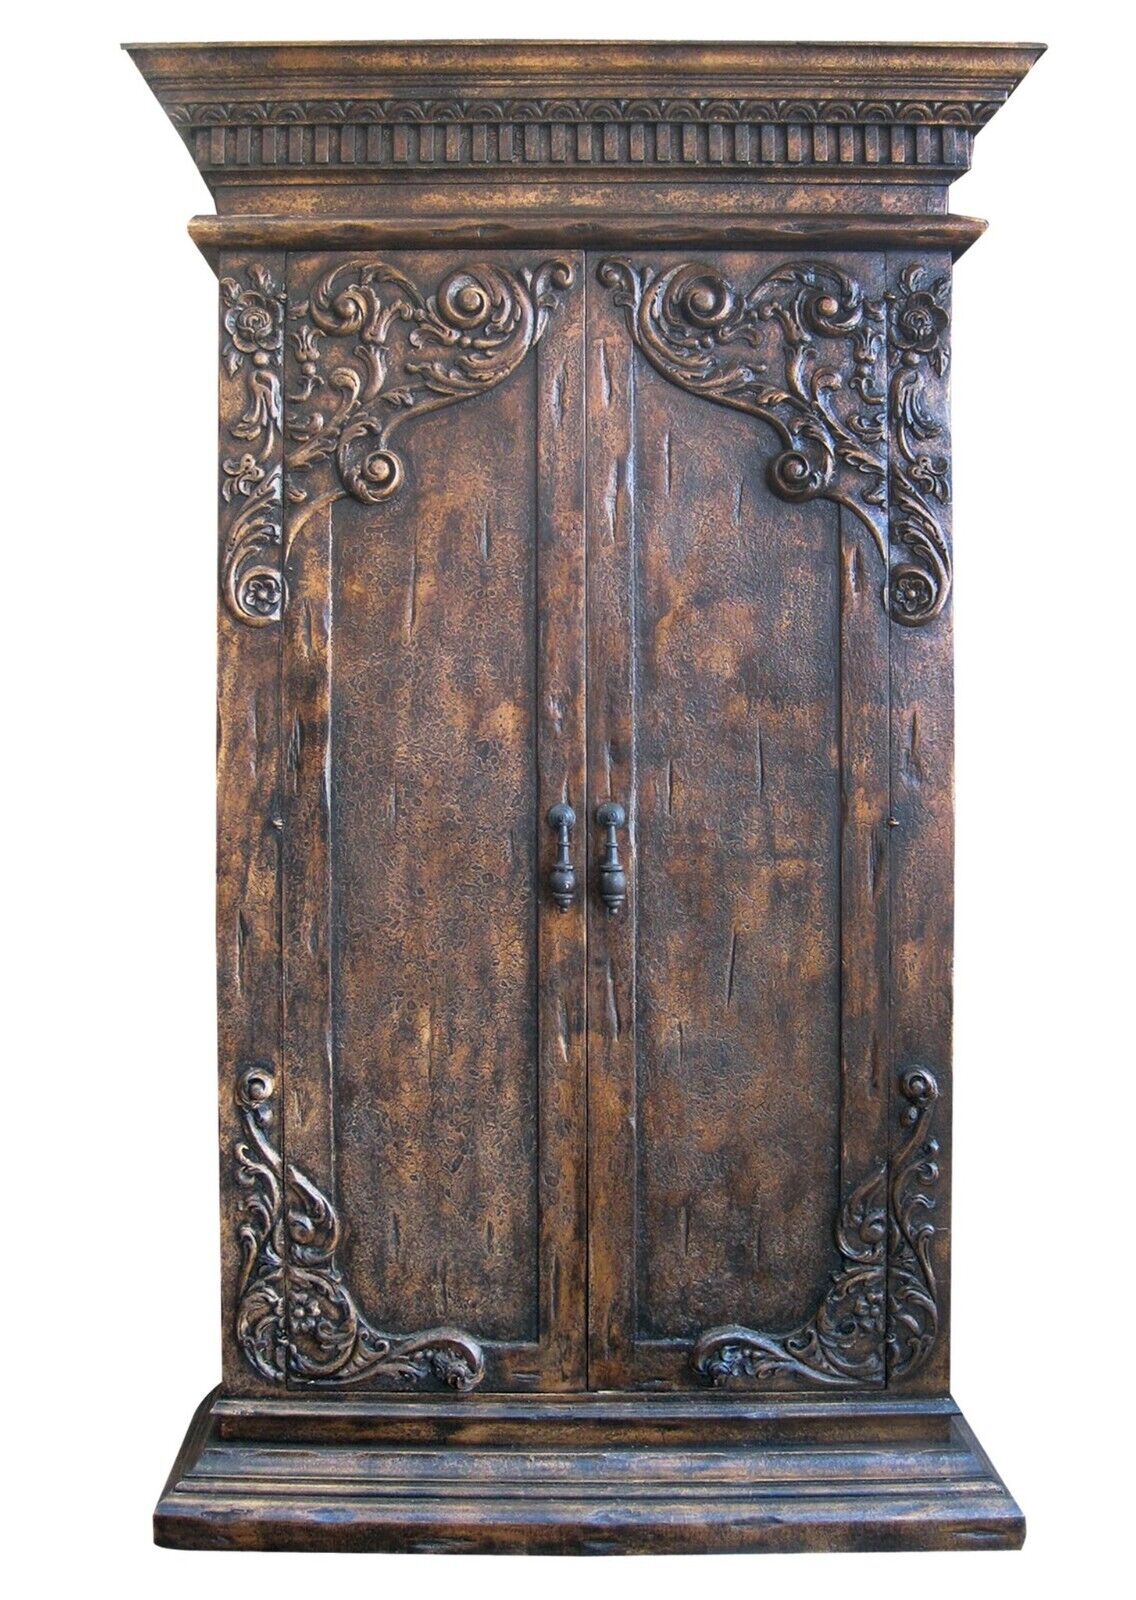 Esofastore Beautiful Hand-Crafted Traditional Armoire, Floral Carvings, Wooden Wardrobe, Cloth Organizer Unit for Bedroom Décor, Santander